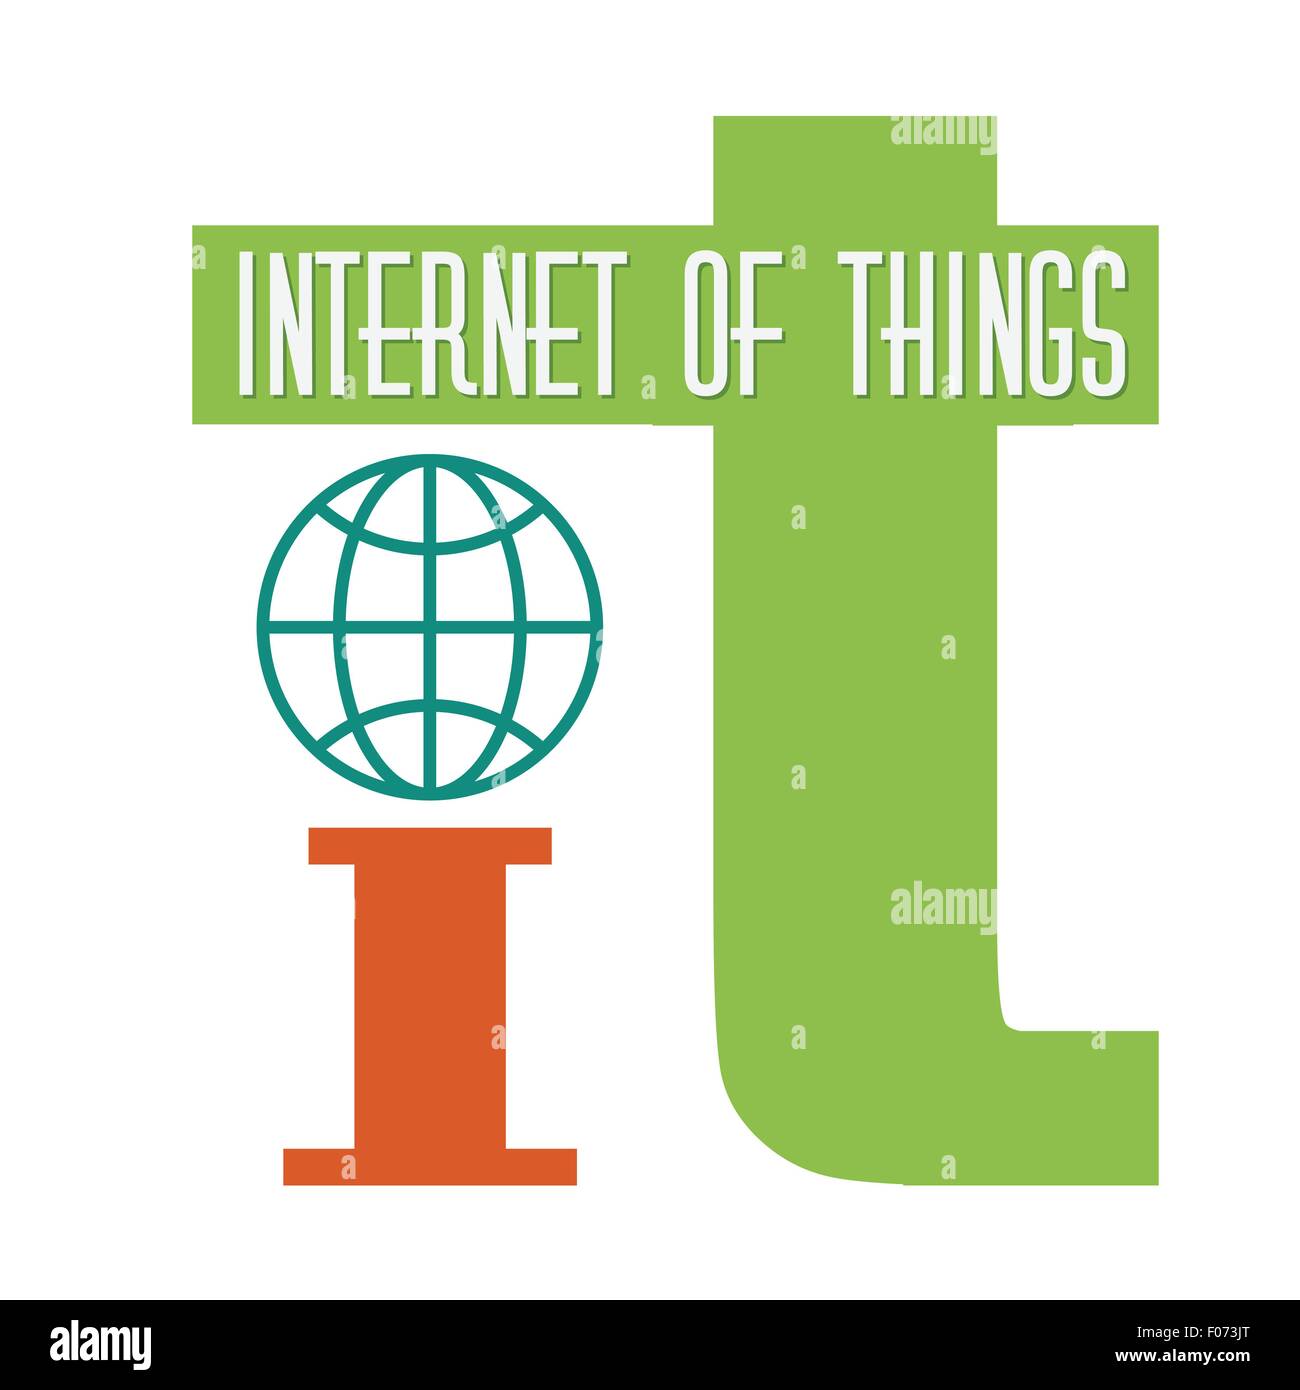 Internet of things web icon vector illustration. Stock Vector